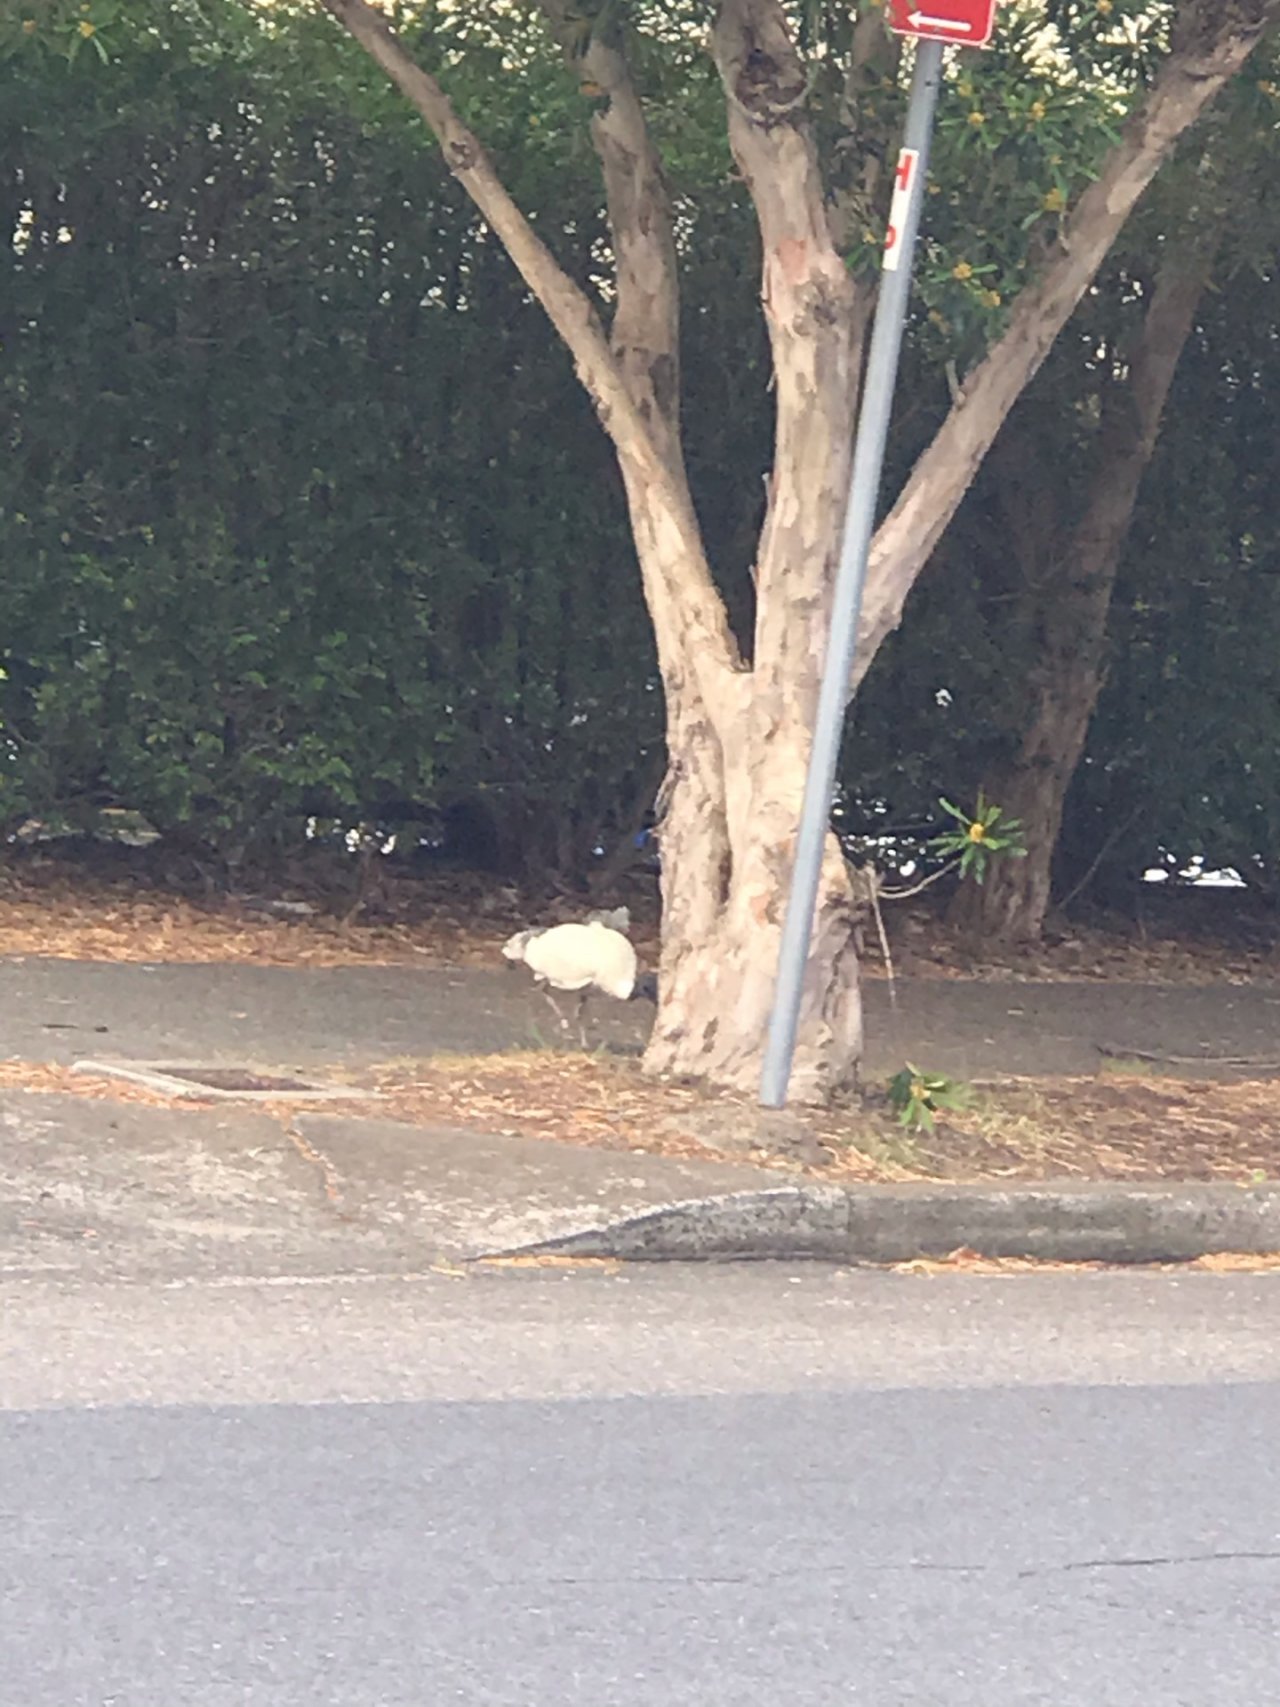 White Ibis in Big City Birds App spotted by Zoe on 12.12.2020